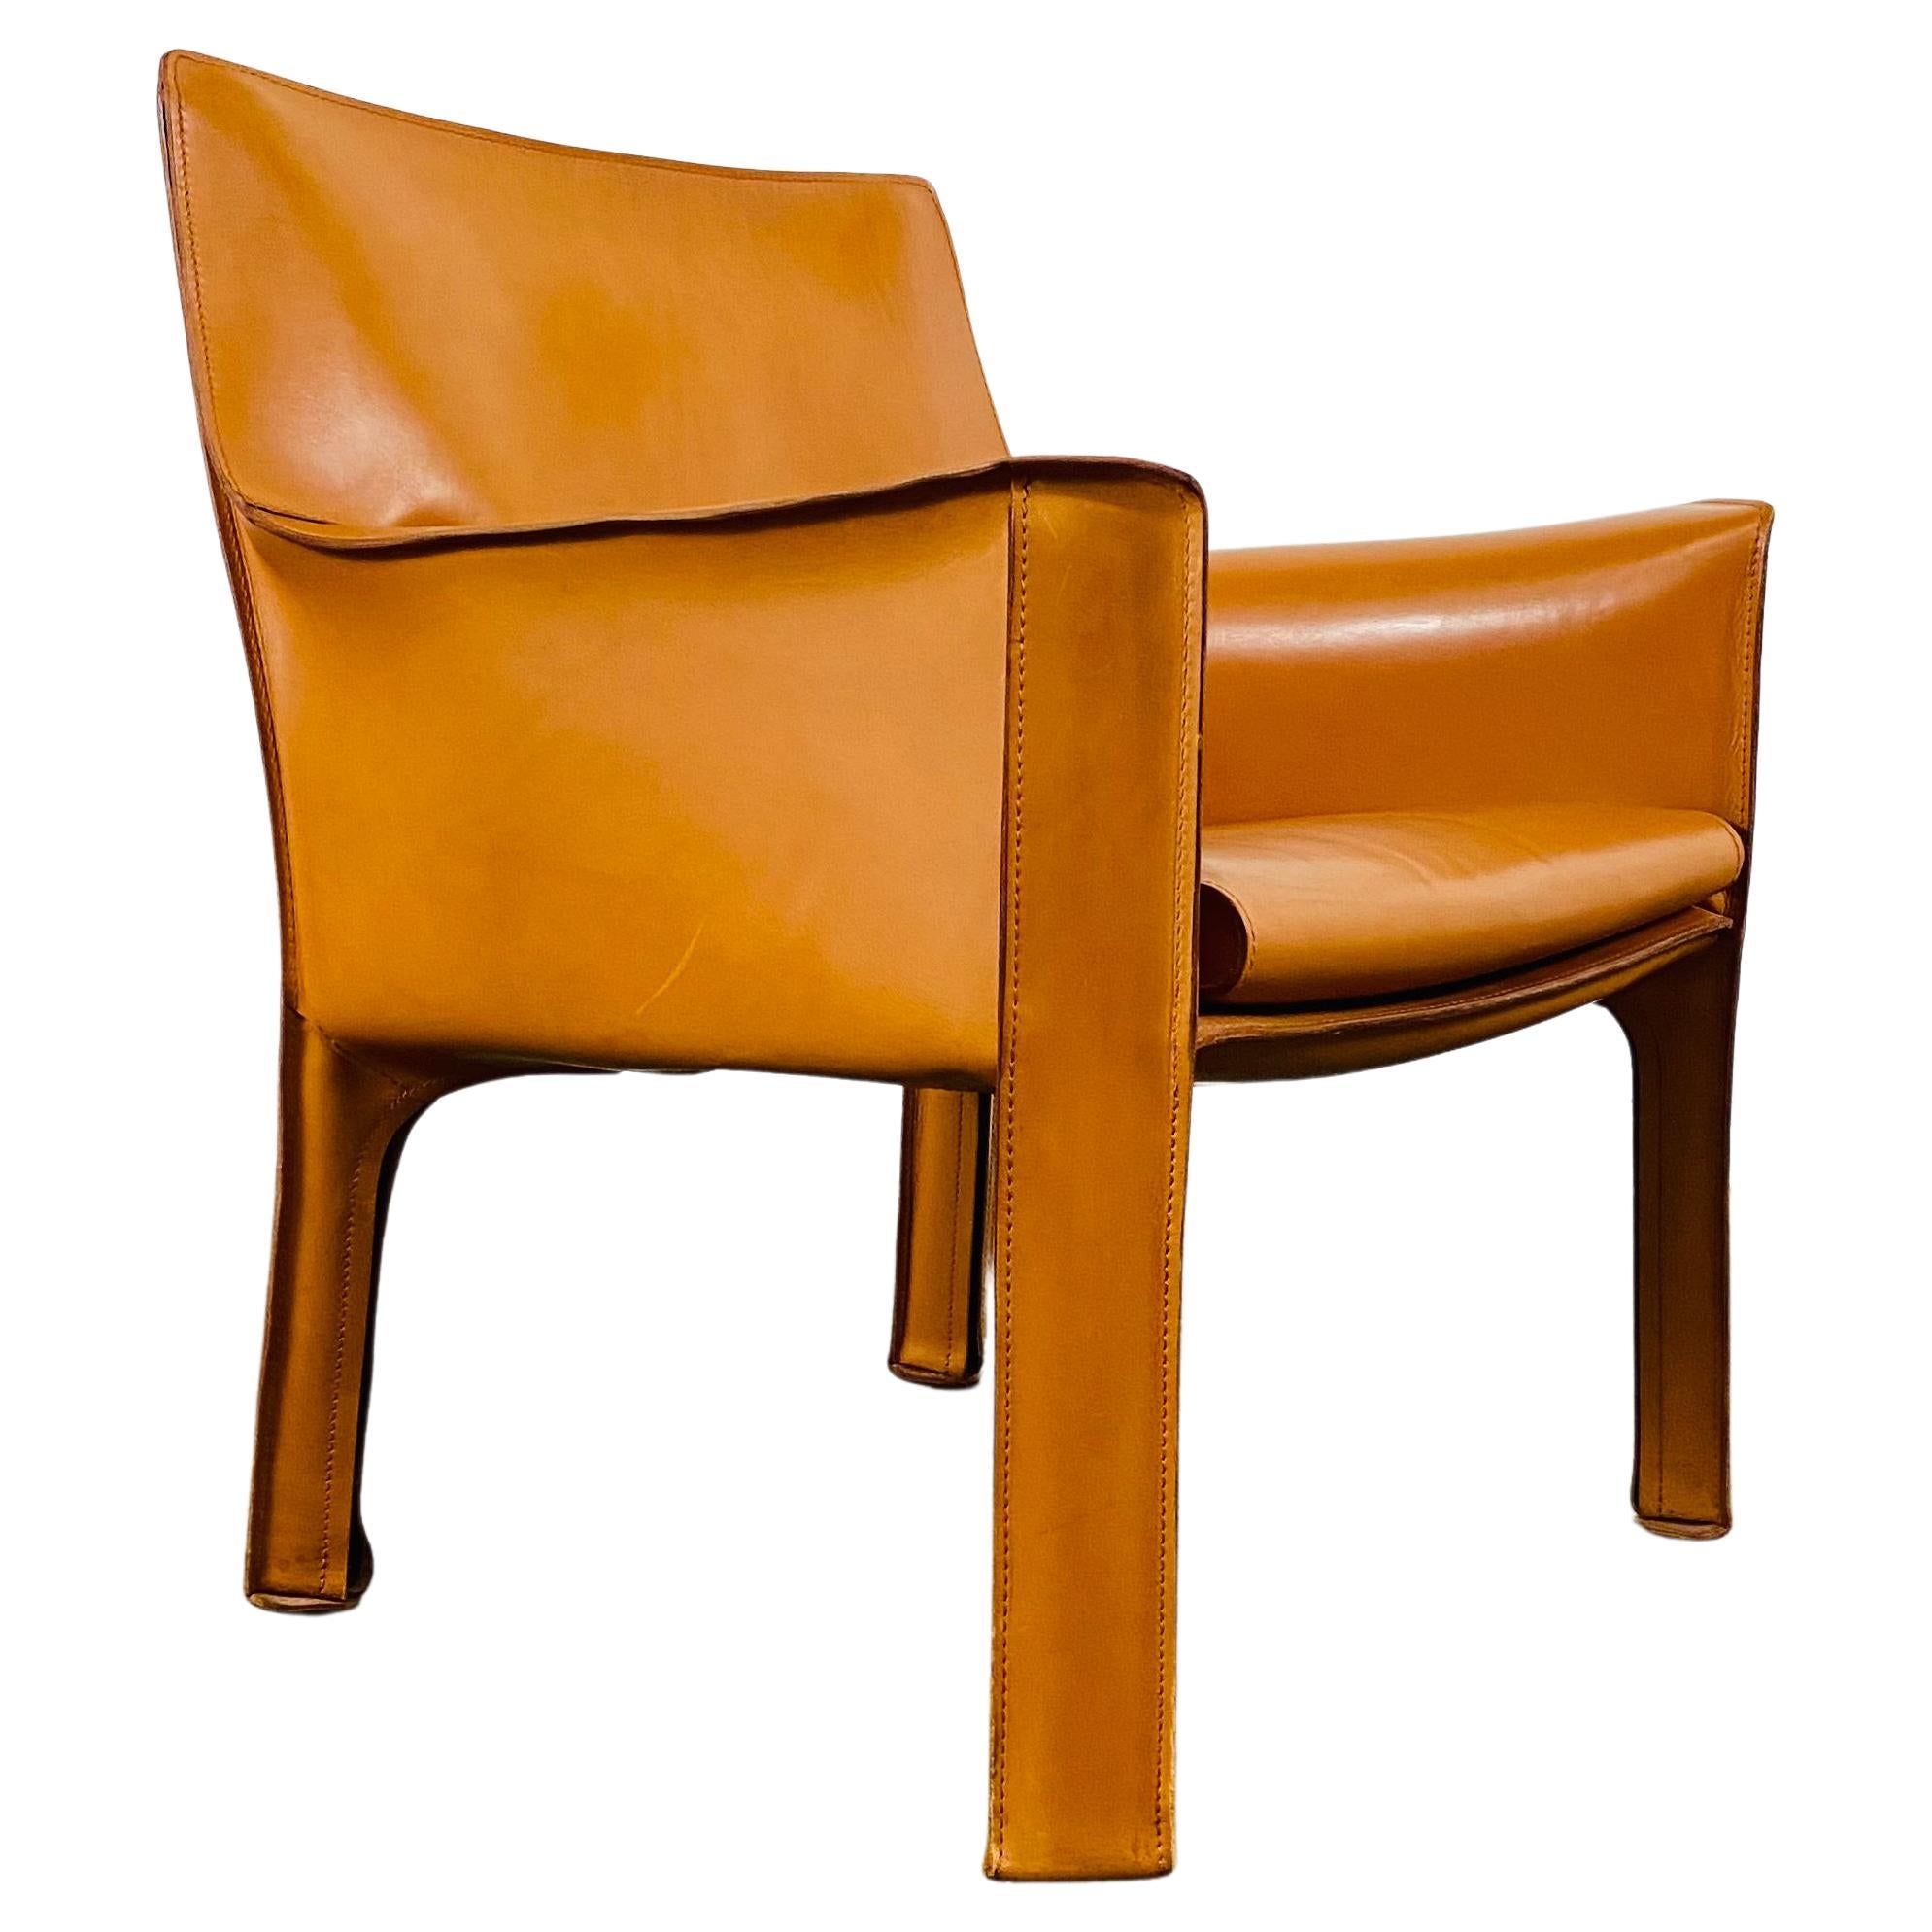 Vintage Italian Cab 414 Cognac Leather Chair by Mario Bellini for Cassina, 1970 